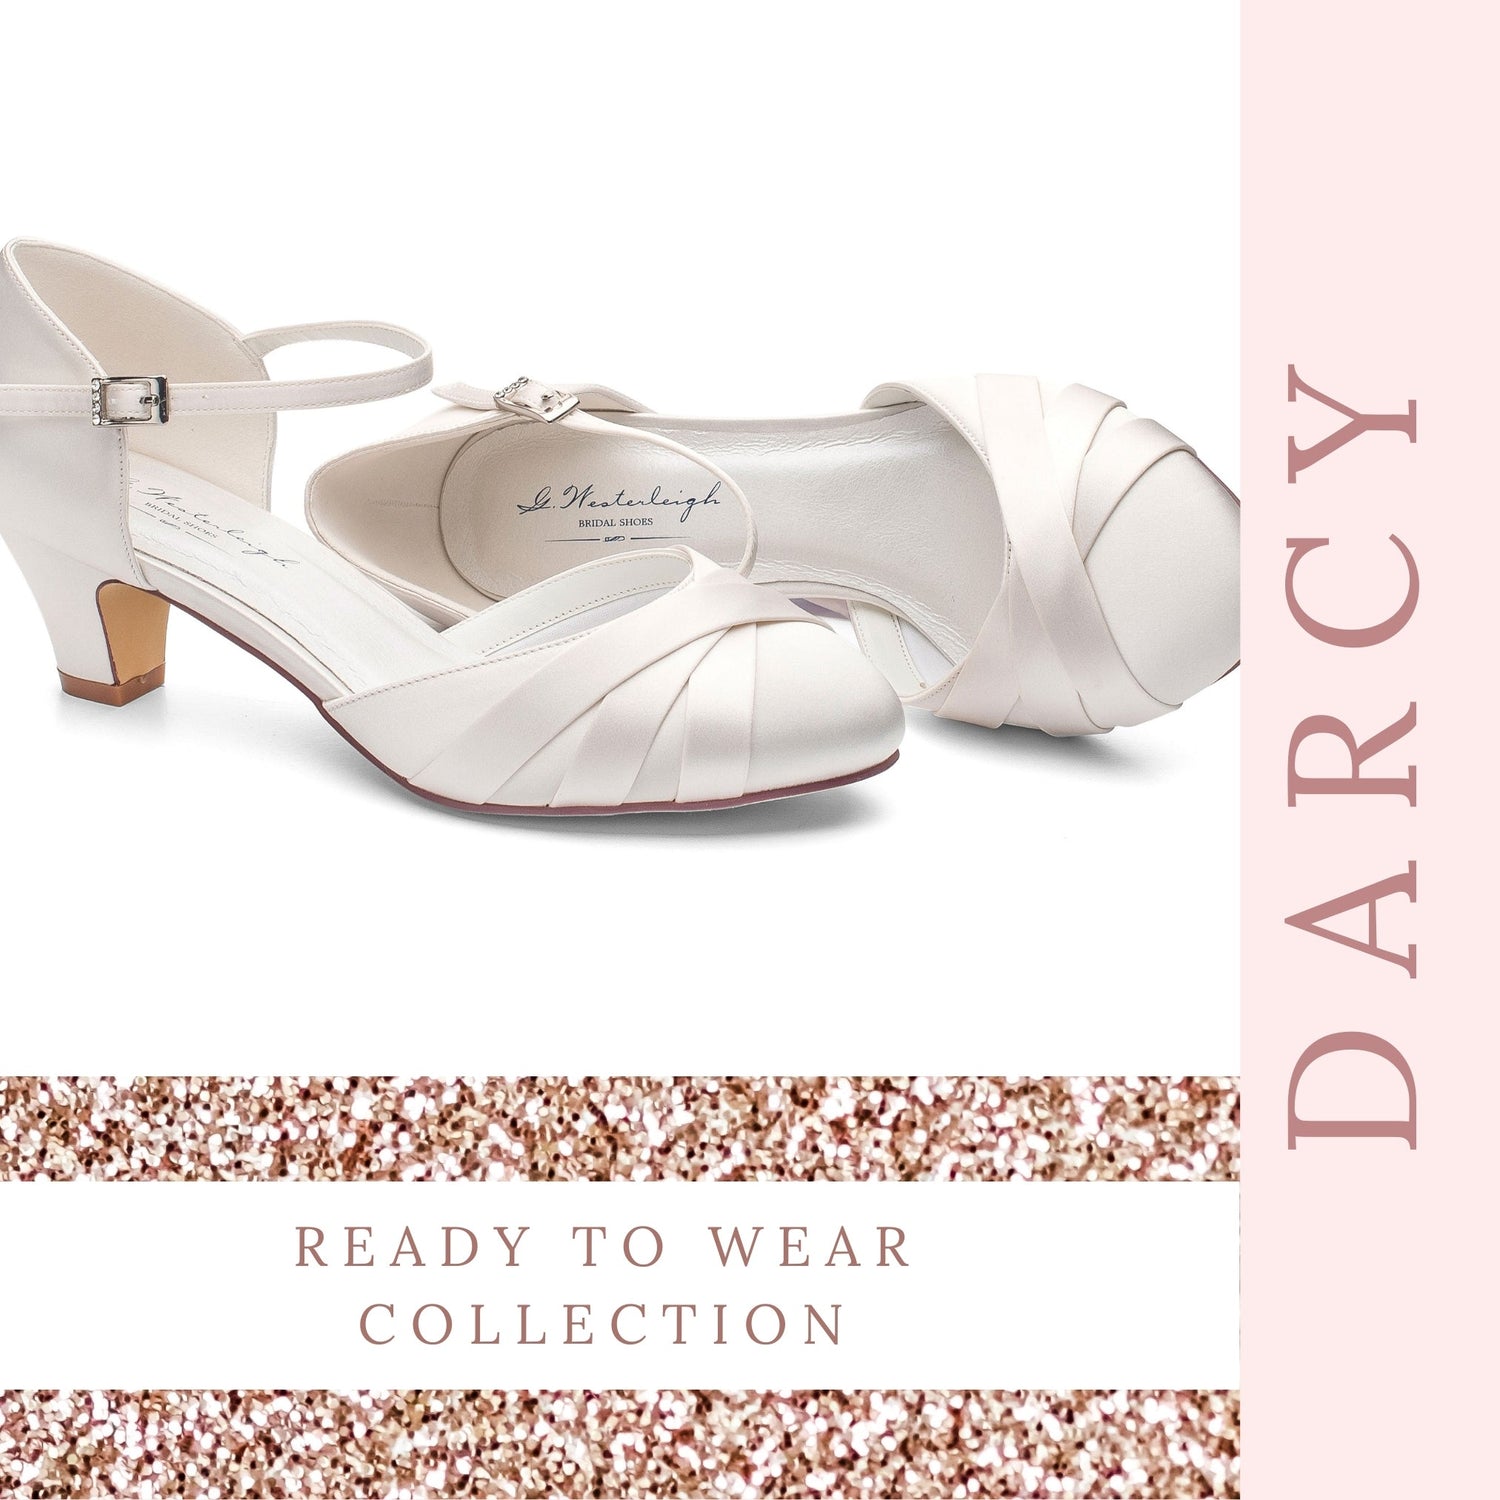 Comfortable Wedding Shoes UK: The Best Styles & Where to Buy Them -  hitched.co.uk